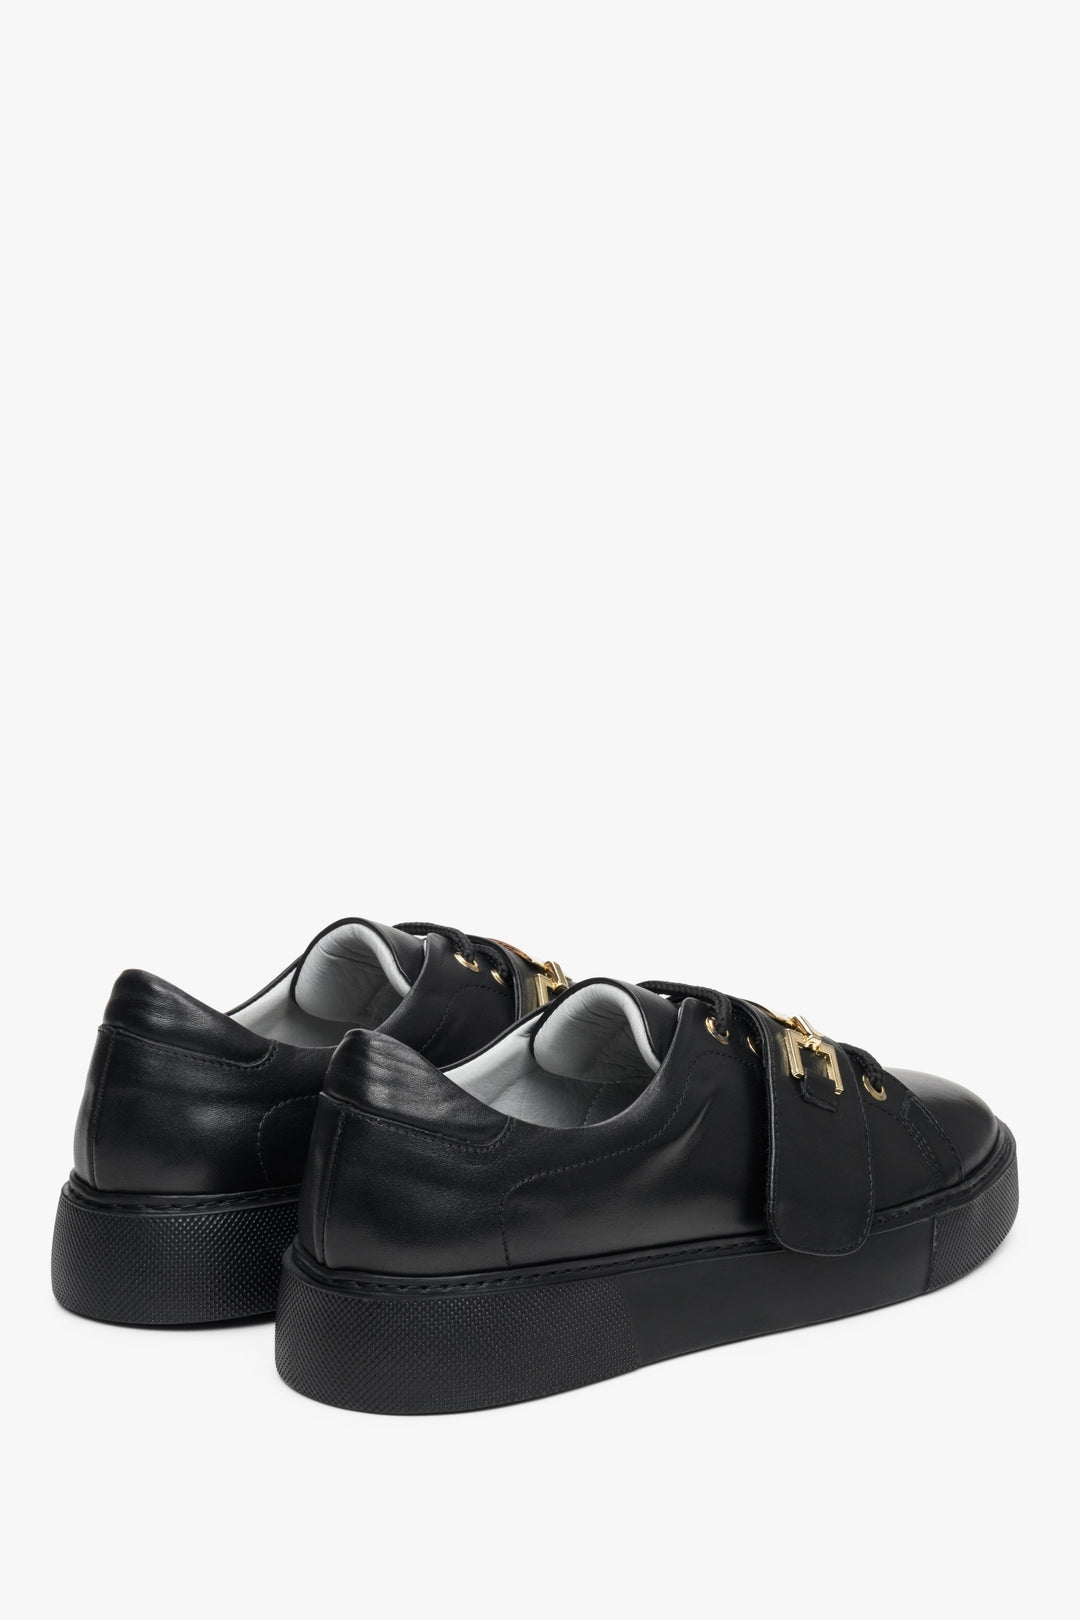 Women's black leather sneakers by Estro with a gold embellishment - close-up on the heel and side seam of the shoes.